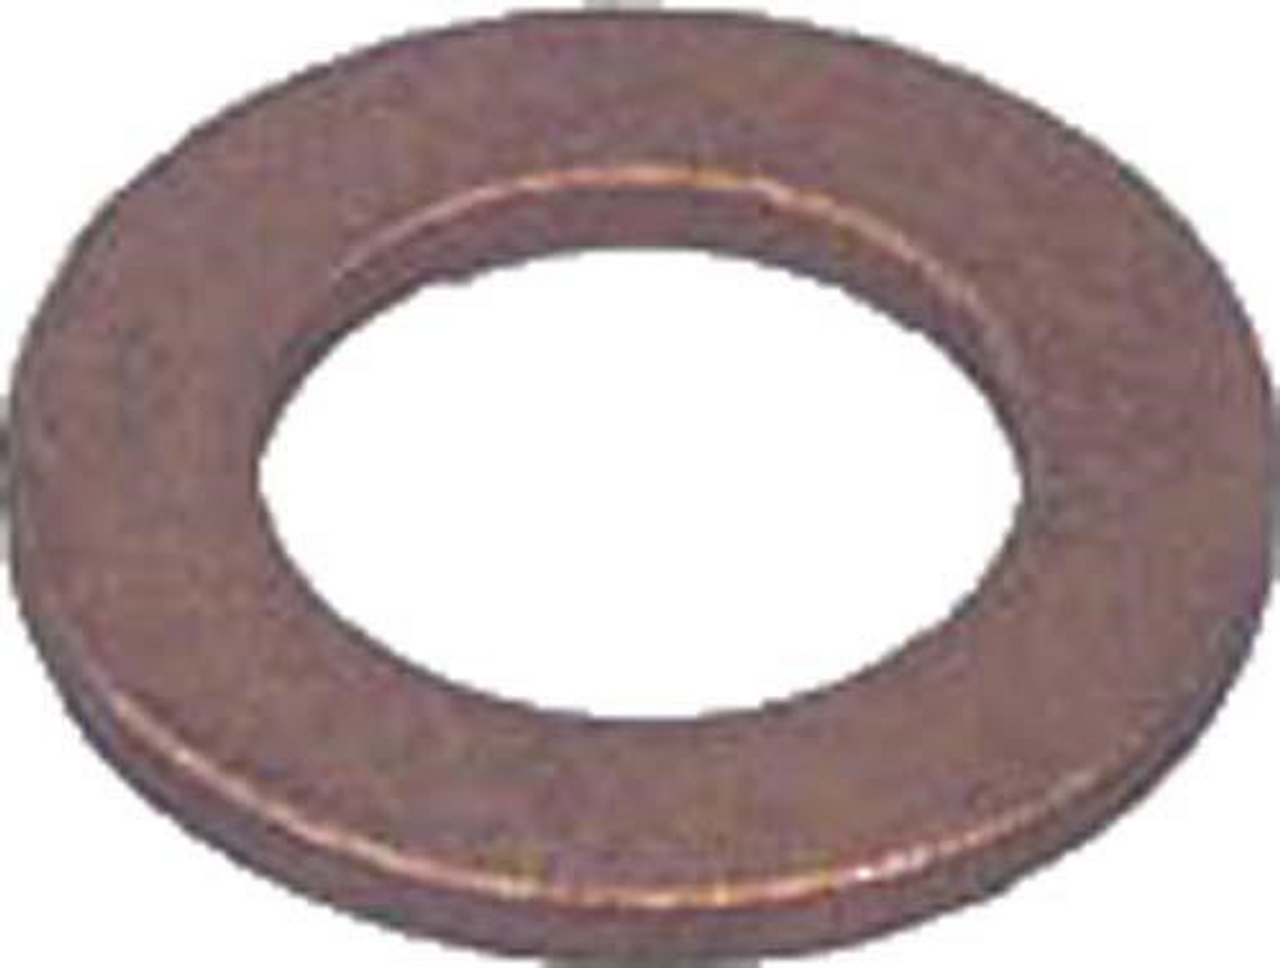 E-Z-GO Spindle Thrust Washer (Years Pre 2000), 628, 16982-G1